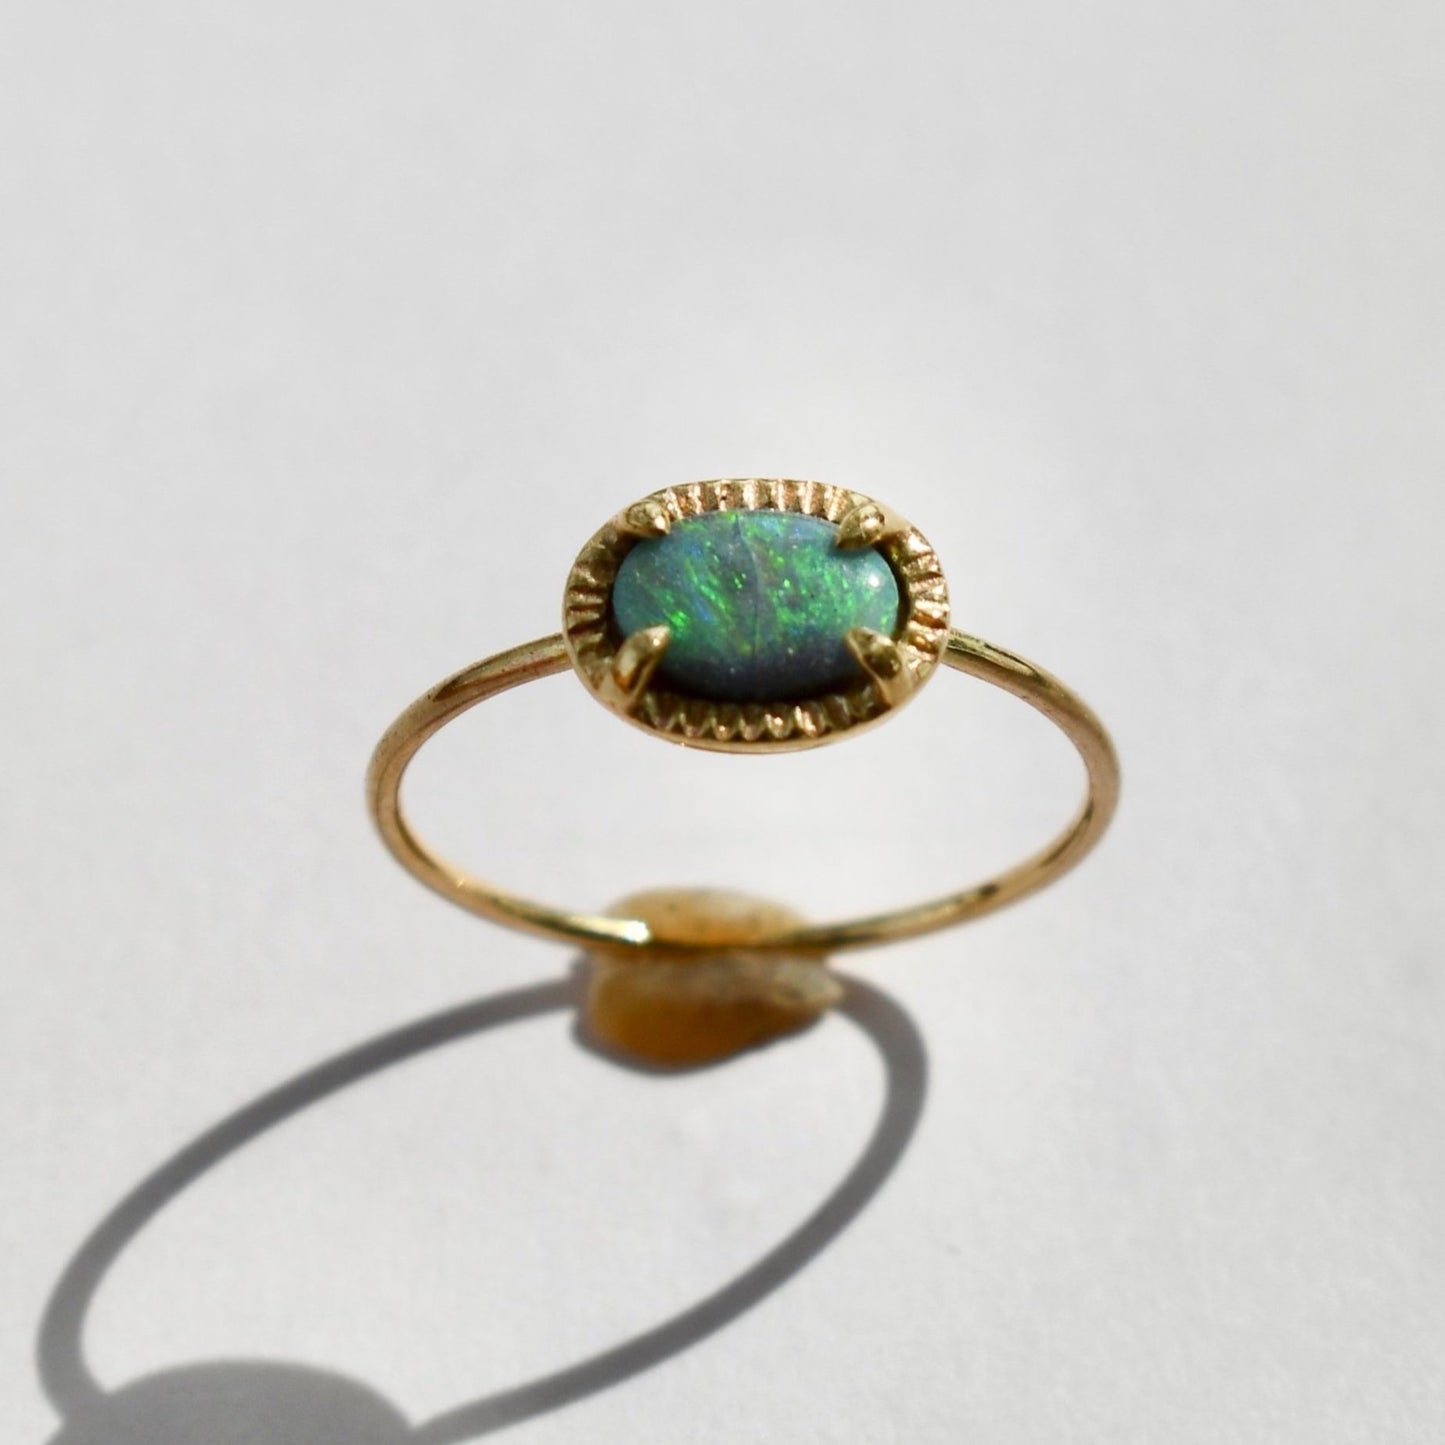 Made by hand in Northern New Mexico using recycled metals and responsibly sourced stones, this timeless, heirloom piece is sure to make a statement. This ring features a 14kt yellow gold 1 mm band with an Australian boulder opal.